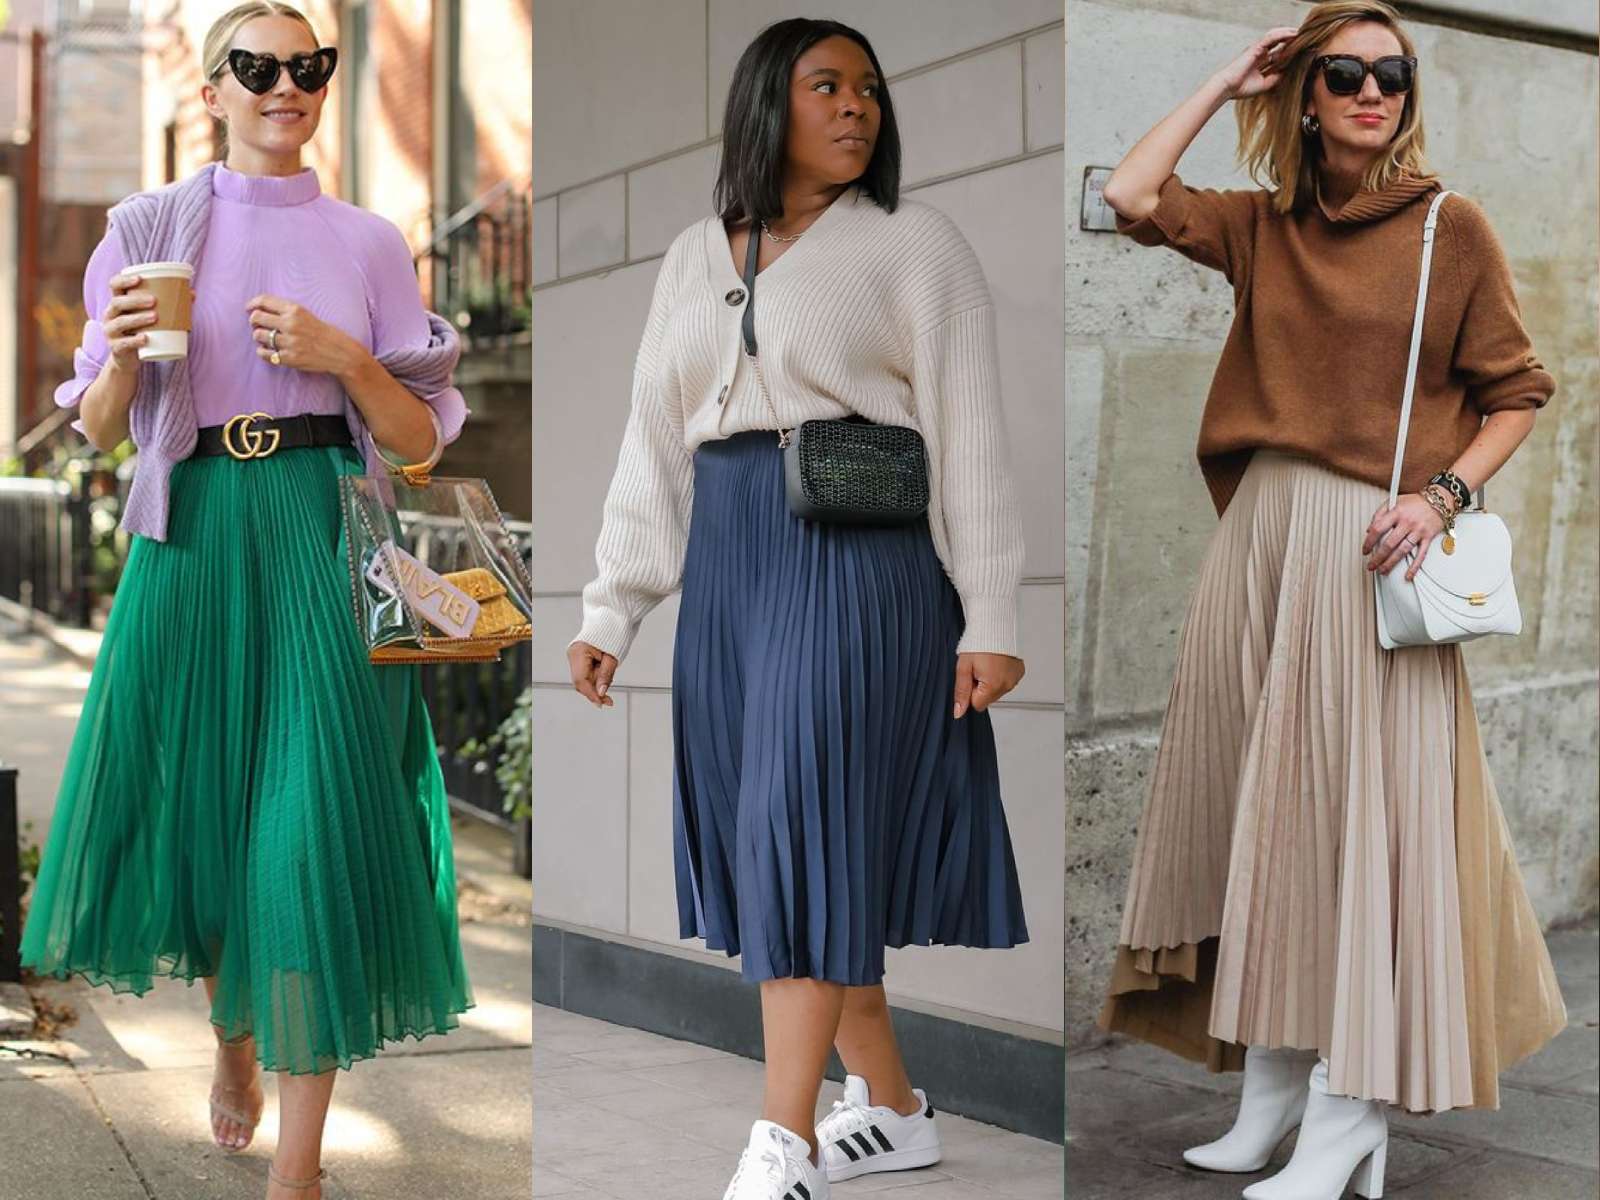 Photos of Pretty of Pleated Skirts: Designers and Celebrities | Glamour